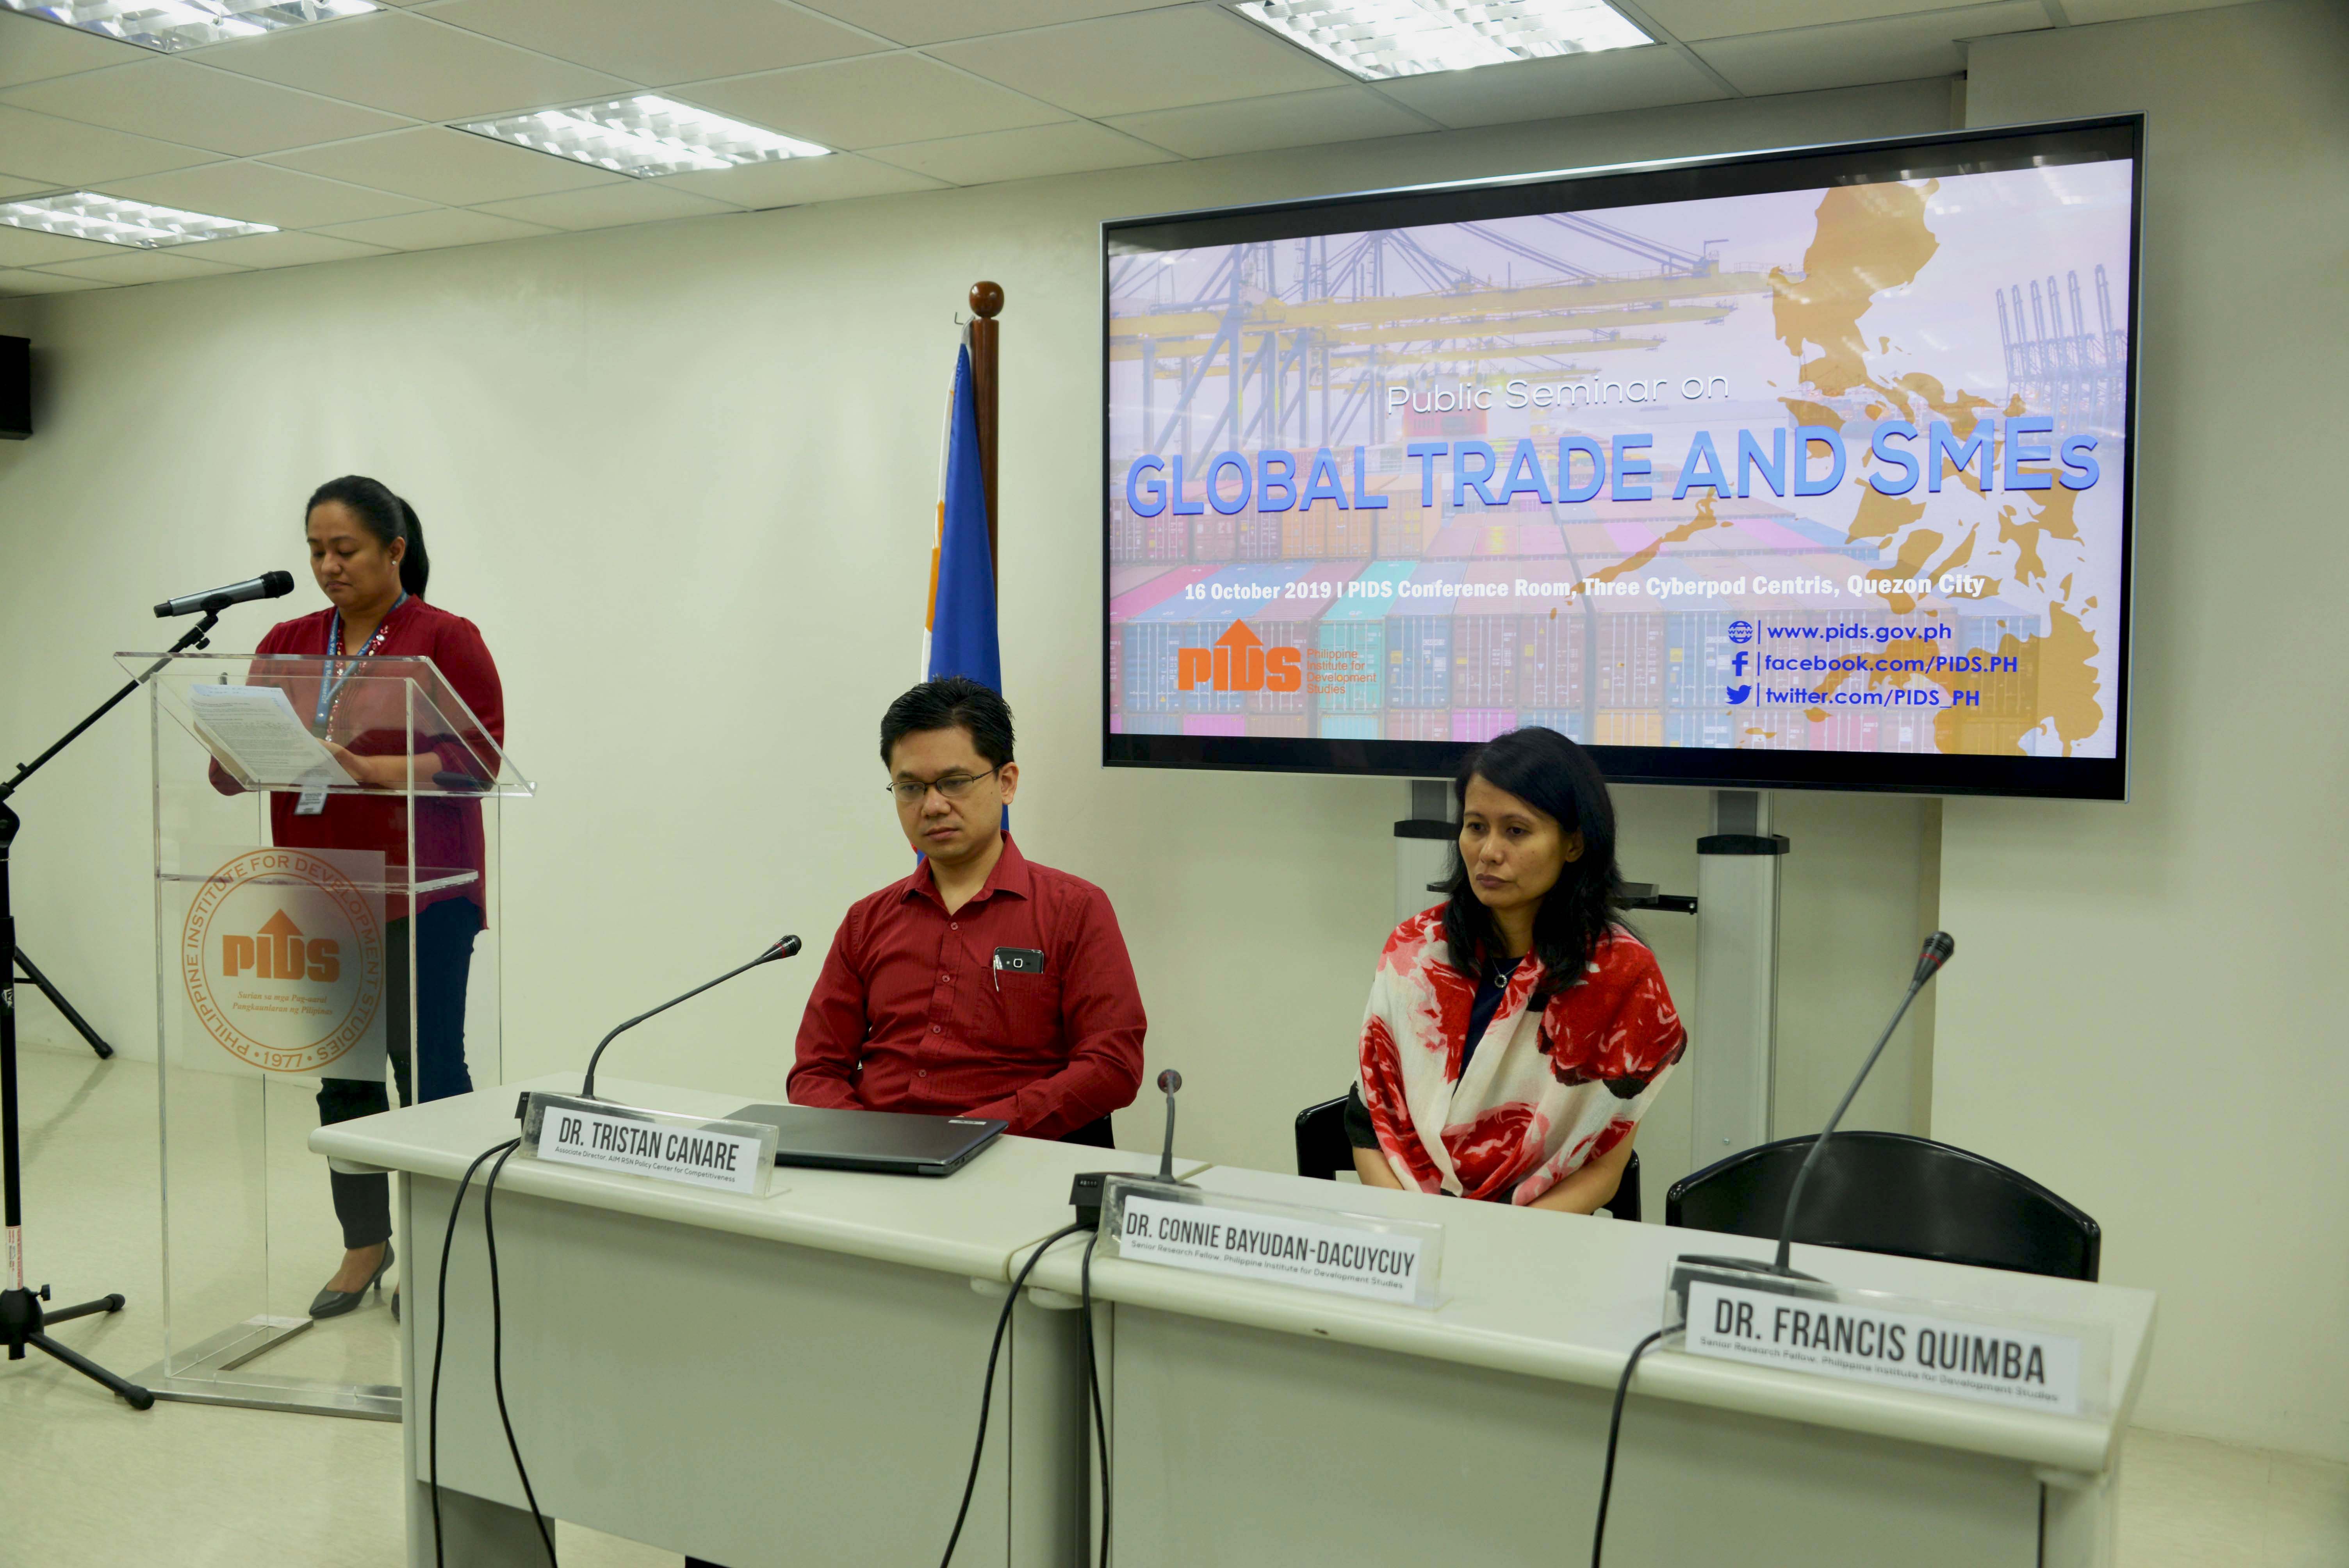 Public Seminar on Global Trade and SMEs-pids-tradesmes-1-20191016.jpg